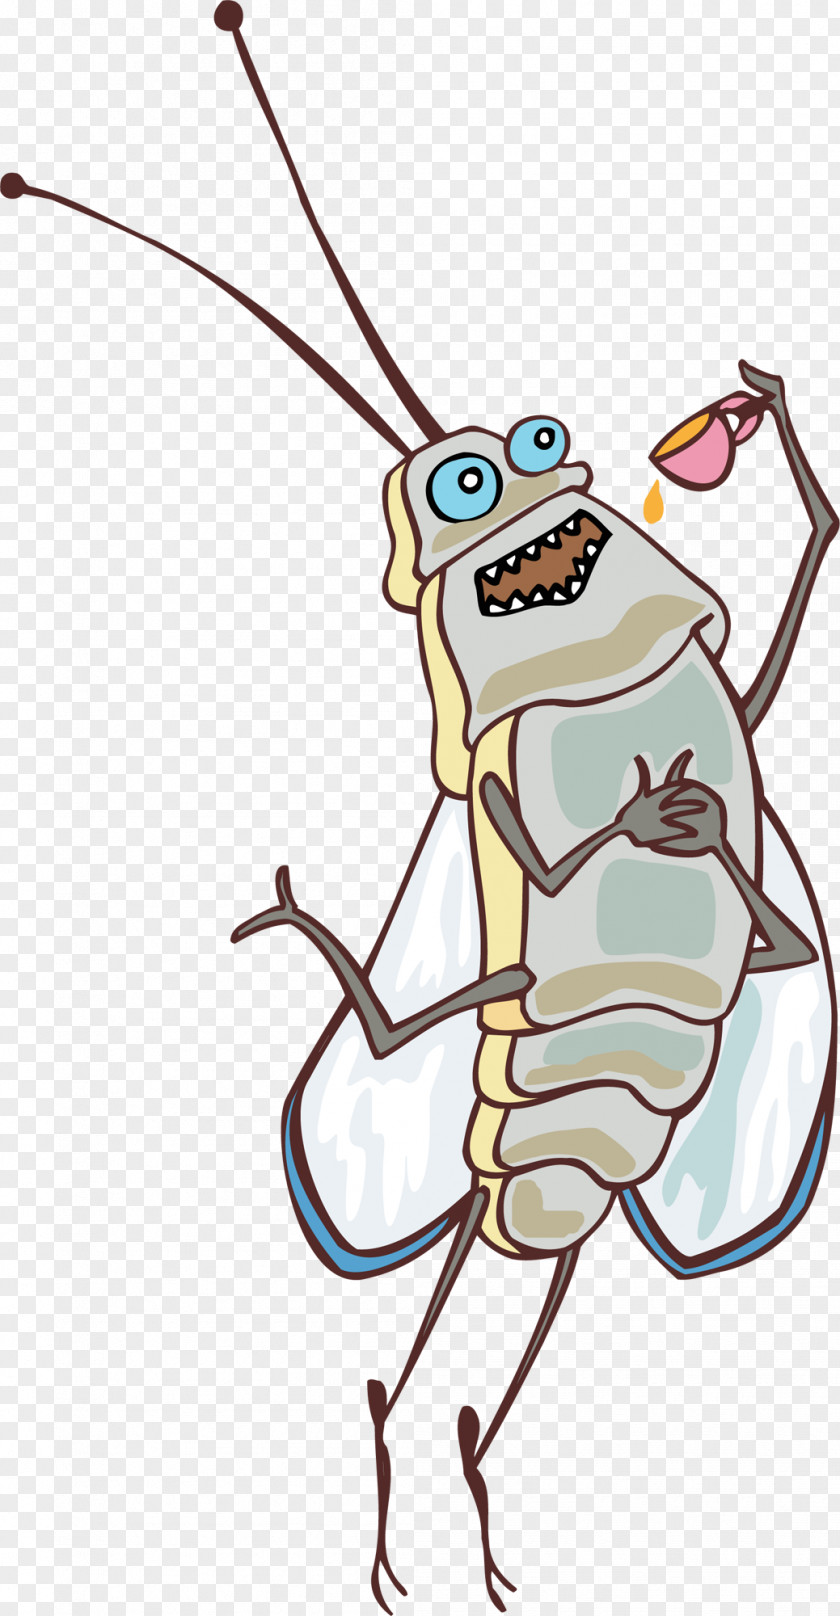 Mosquito Insect Little Fly So Sprightly Cockroach Clip Art PNG